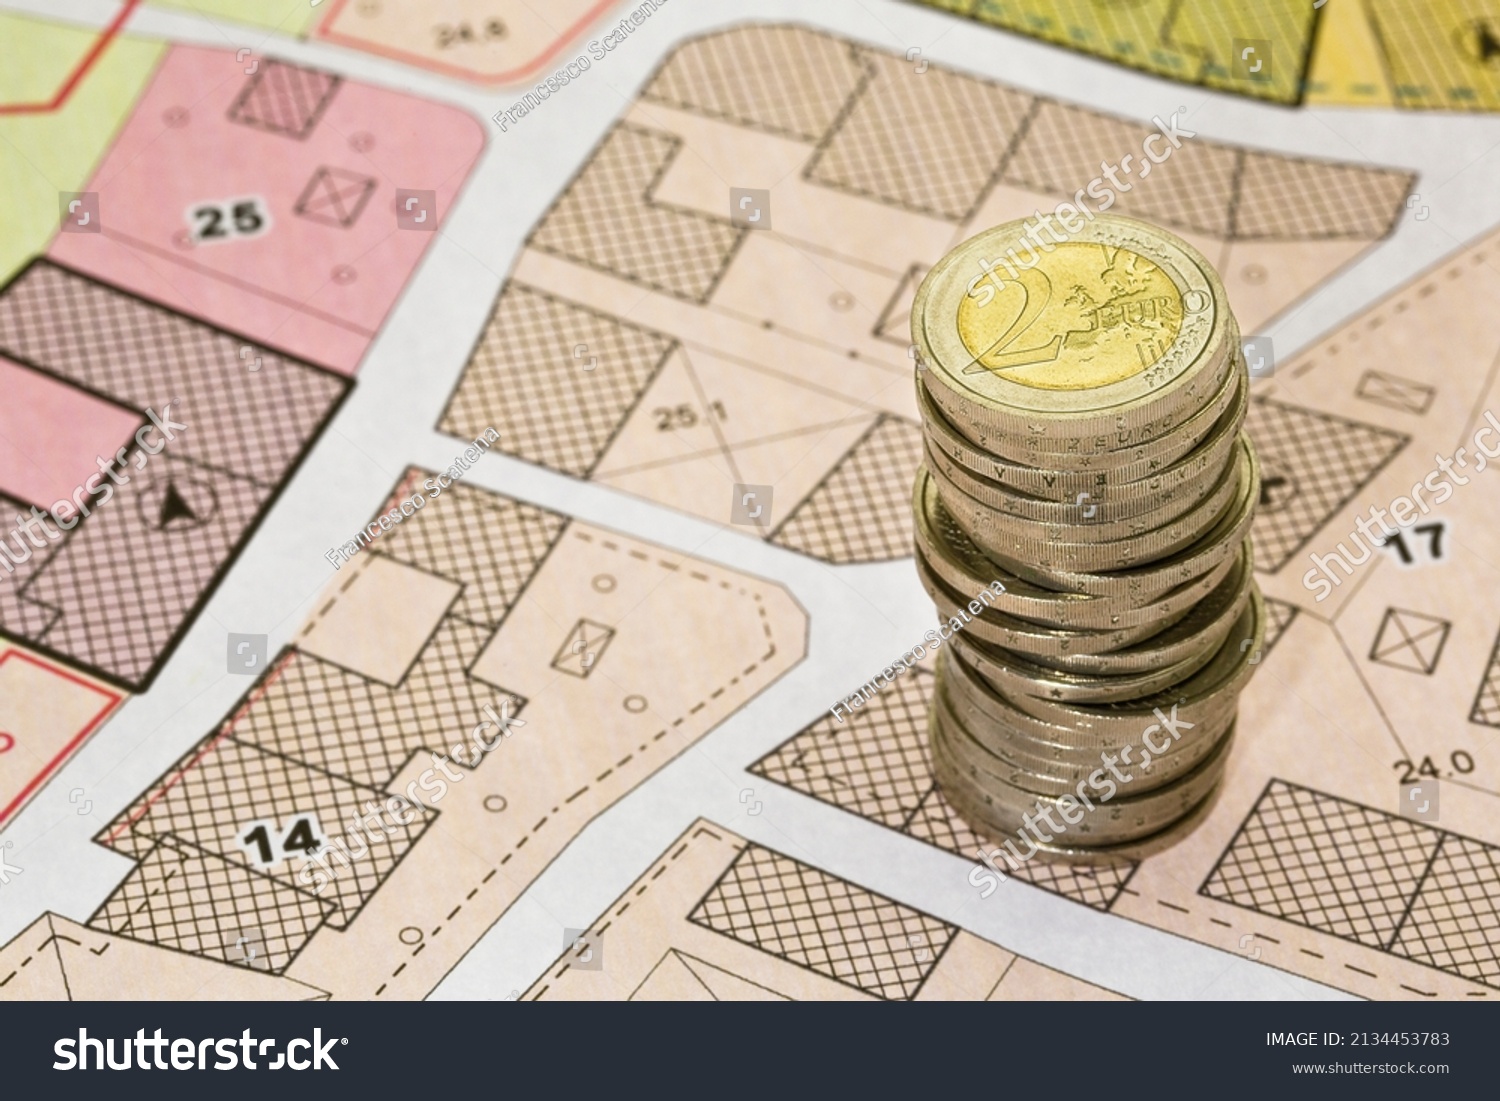 Land registry fees in European Union - concept with an imaginary cadastral map of territory with buildings, land parcel european euro coins #2134453783